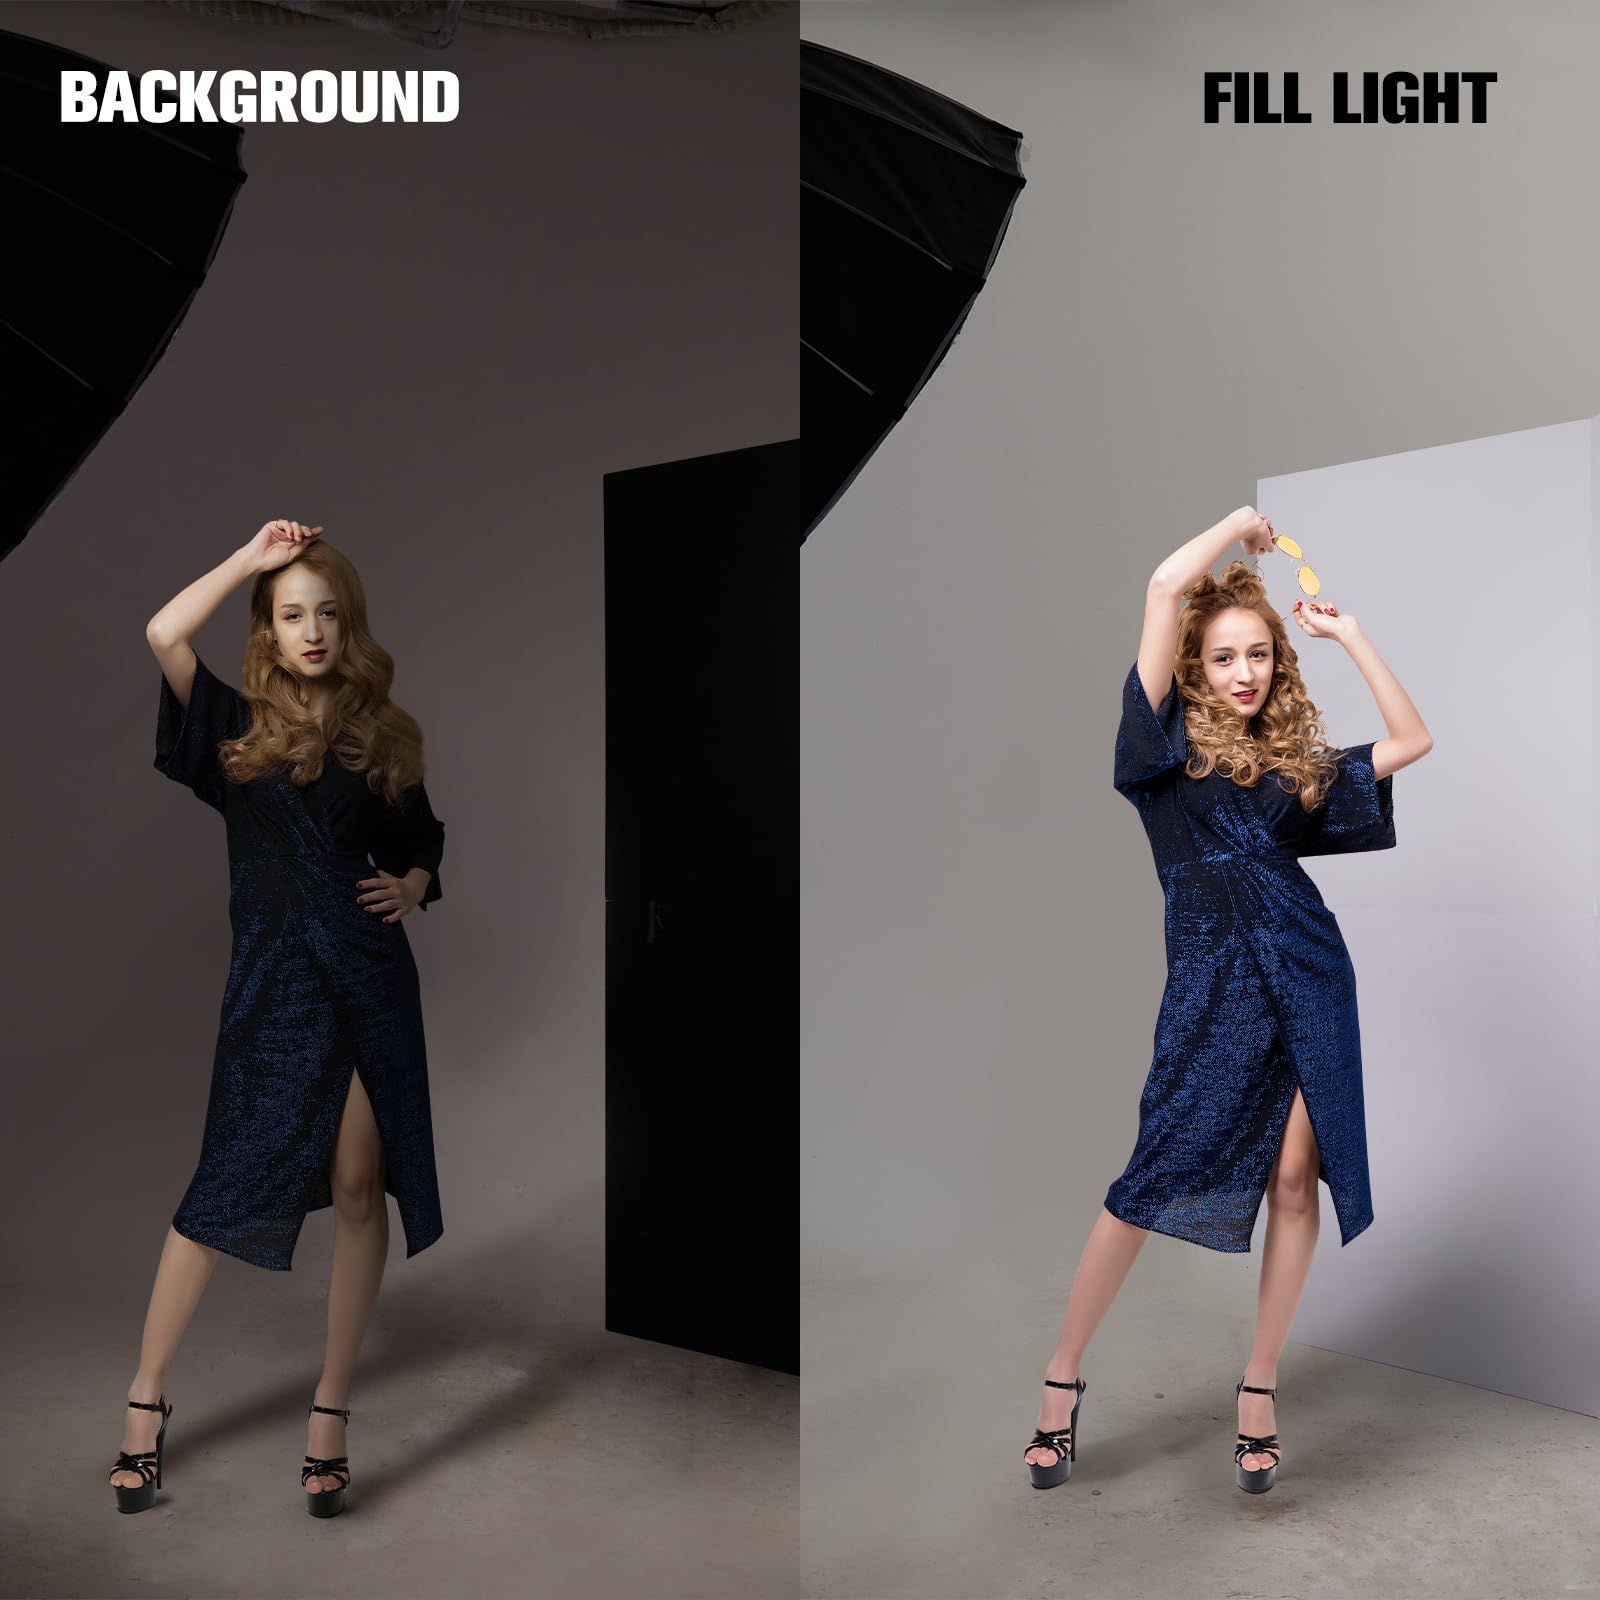 Photography Foldable Reflector Backdrop, 78.7x78.7inch 2 in 1 Background Cardboard, Double Sided Black/White Light Diffuser Board, BEIYANG